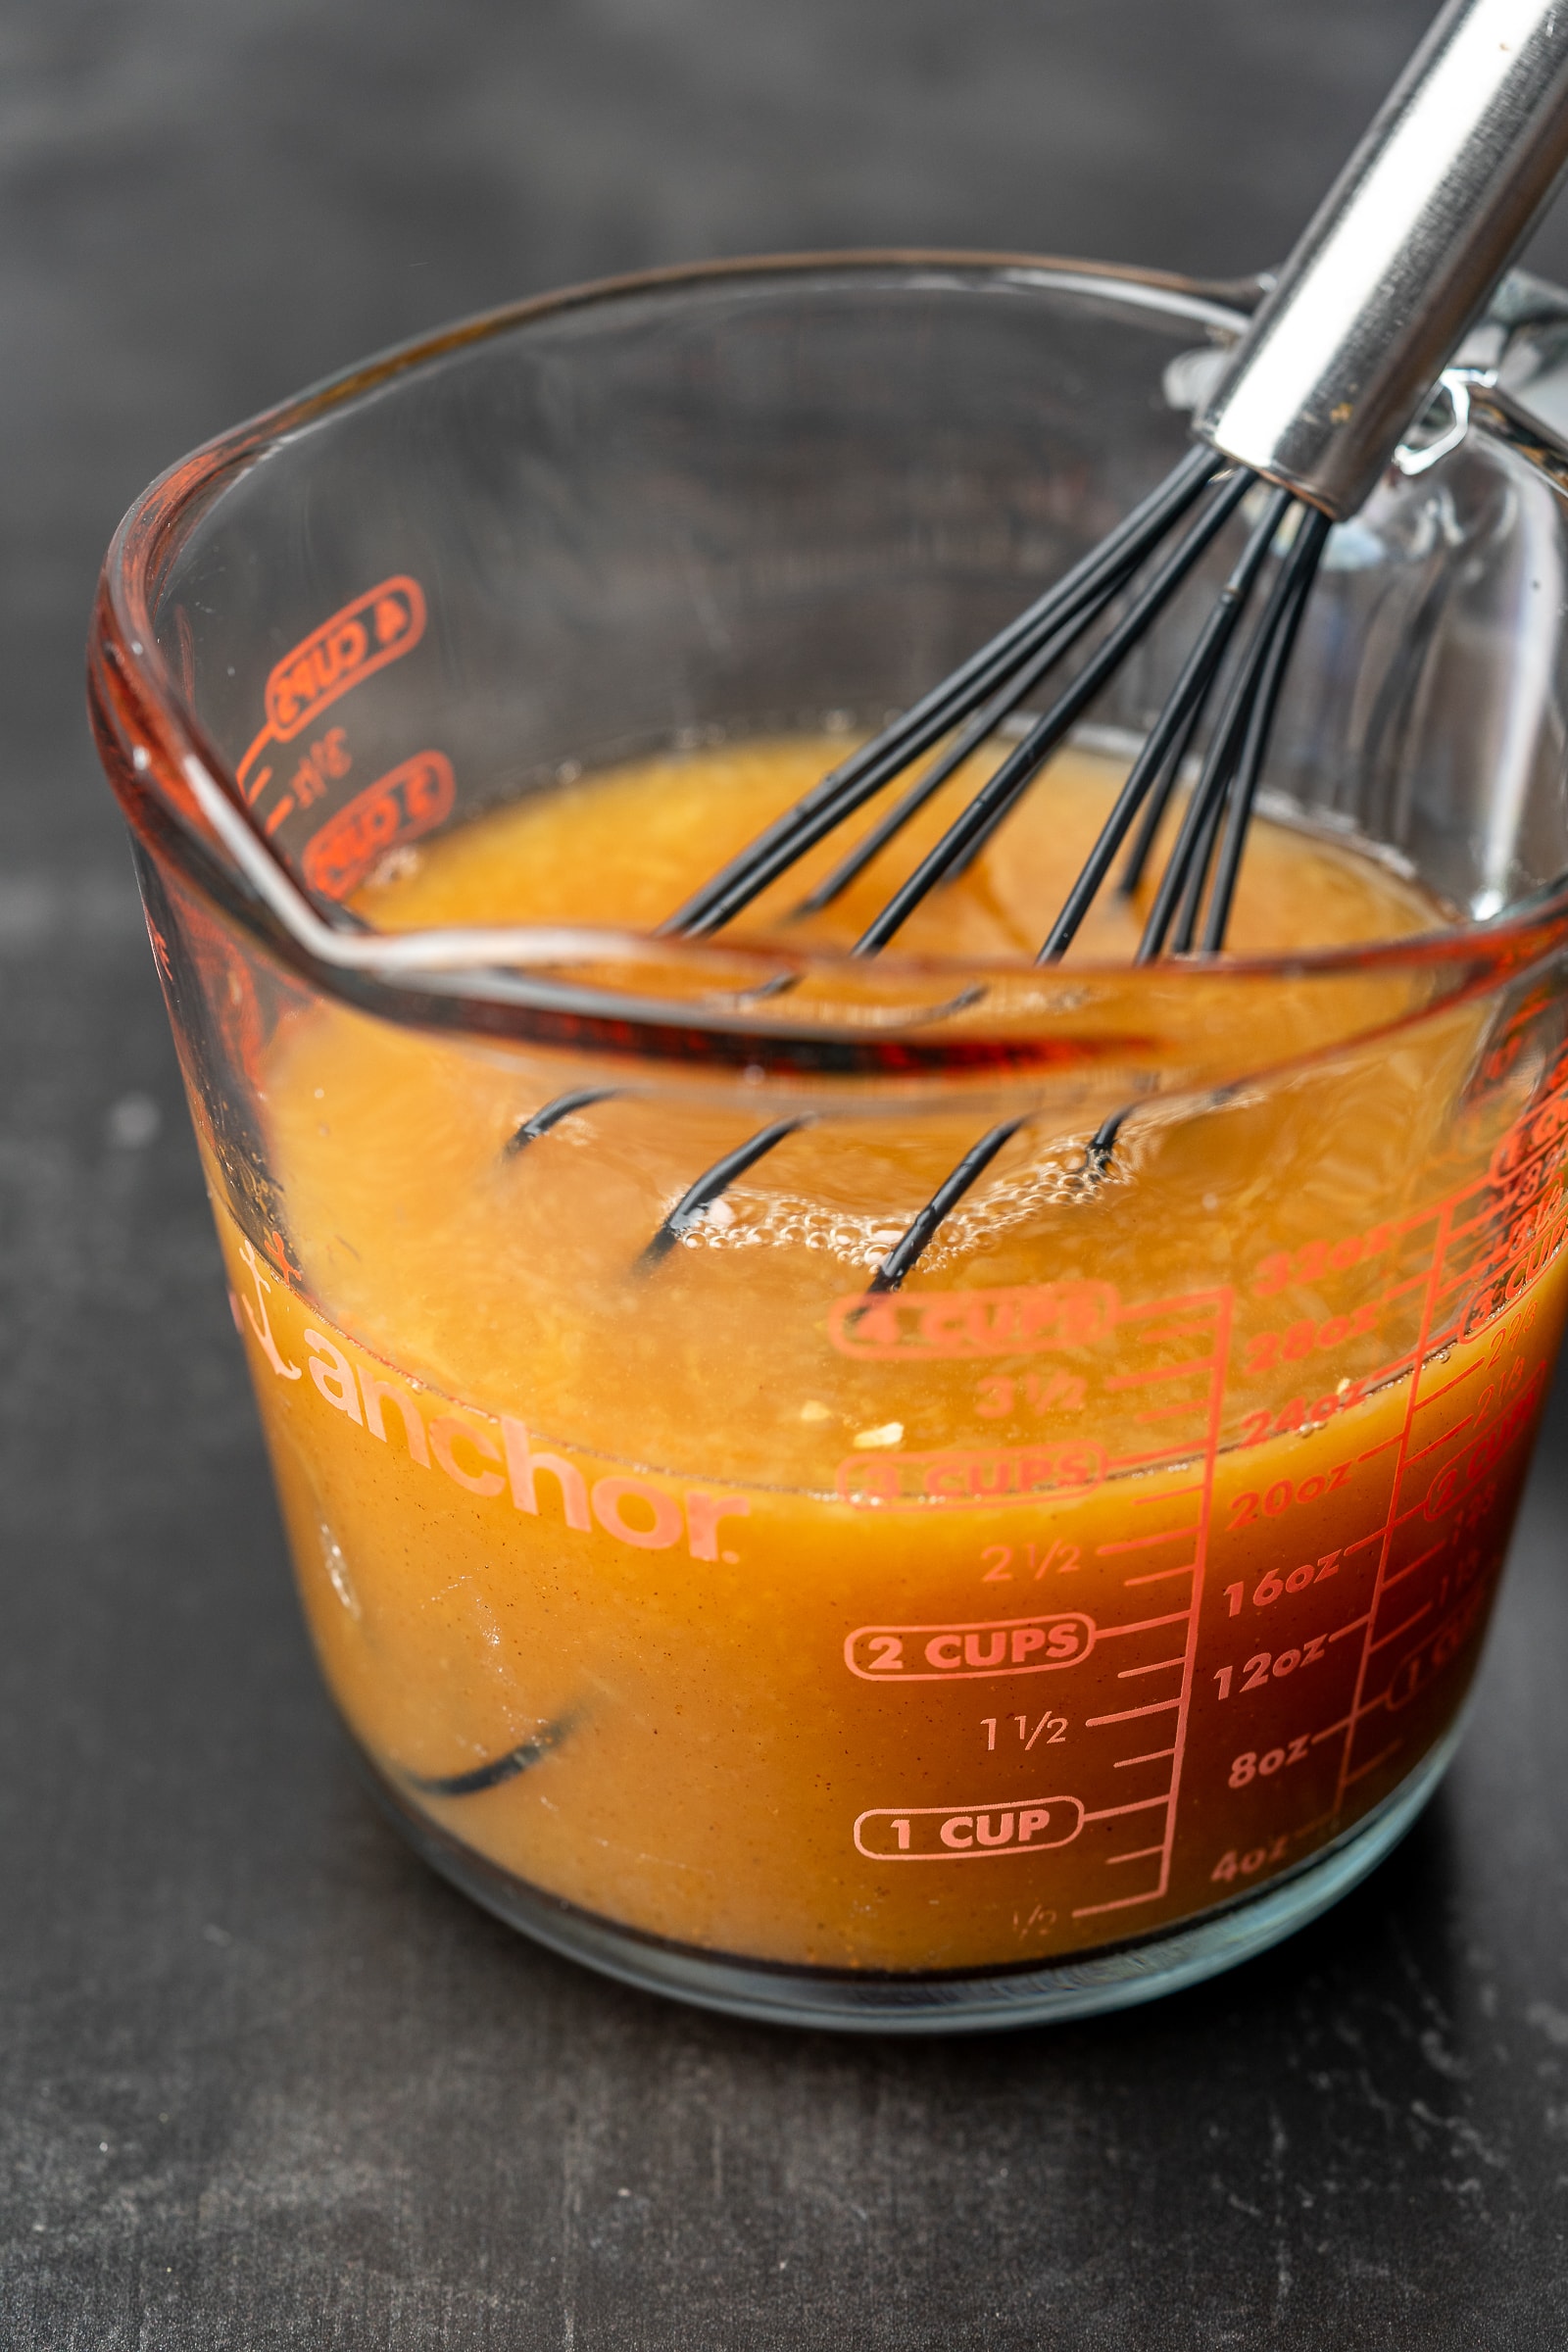 Orange juice, apple cider, and brown sugar syrup in a glass measuring cup.